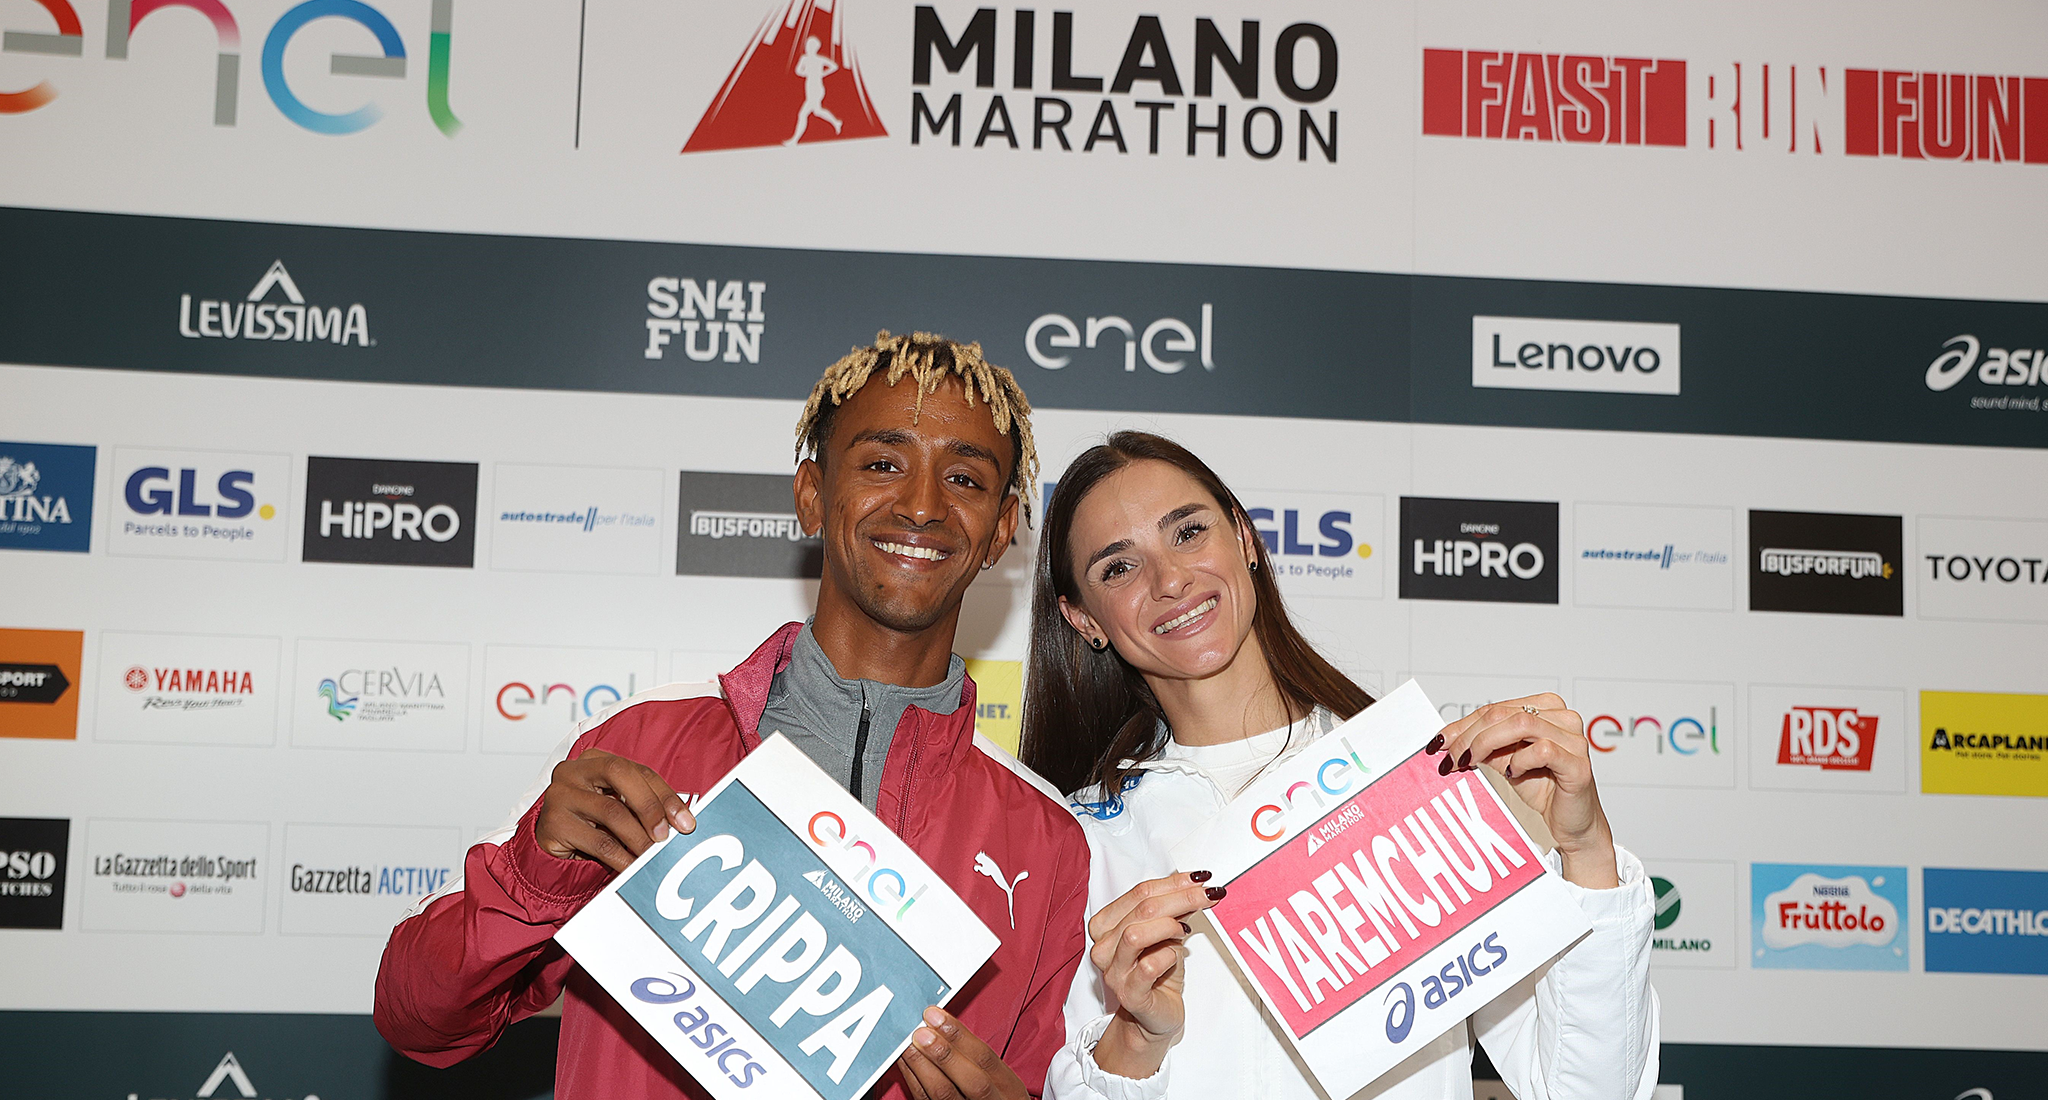 Enel Milano Marathon: the Top Runners of the 21st edition